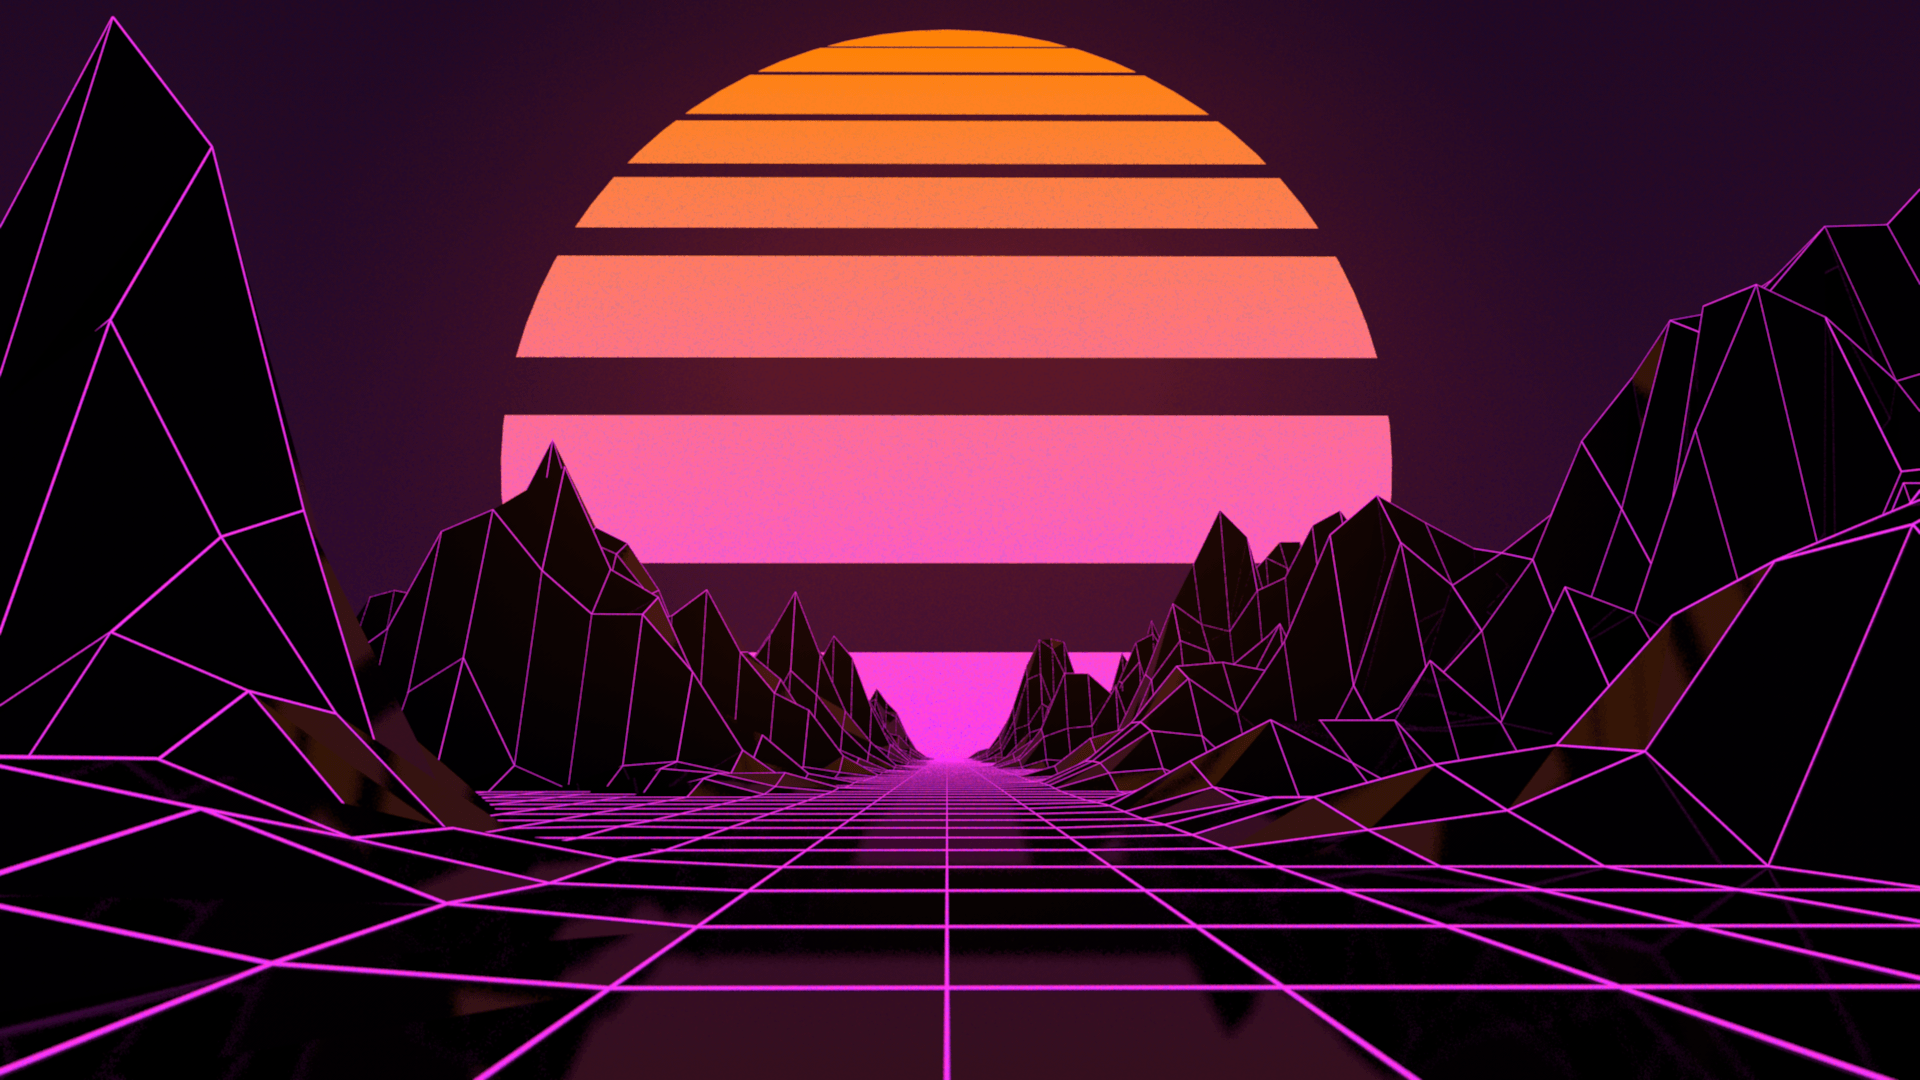 It's cliche, but I tried my hand at making an Outrun sunset